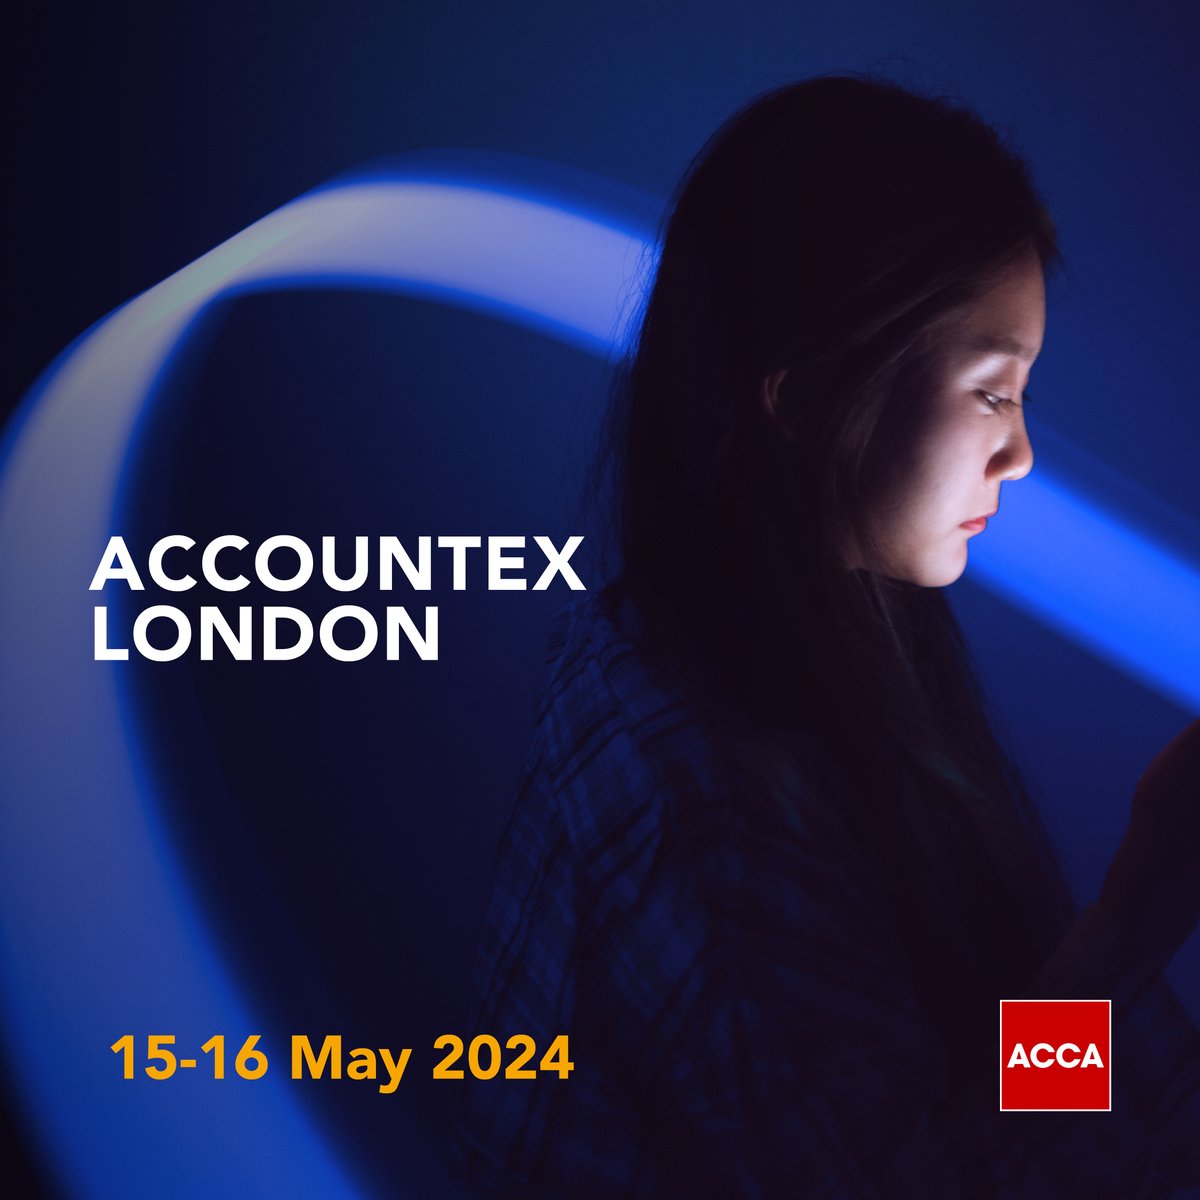 We're thrilled to announce our presence at Accountex again this year on May 15th and 16th! Join us at Stand 30 and in Theatre 2 for an engaging program of sessions covering key trends and topics in the UK financial landscape. Reserve your space here: ow.ly/8N2P50RzfXq